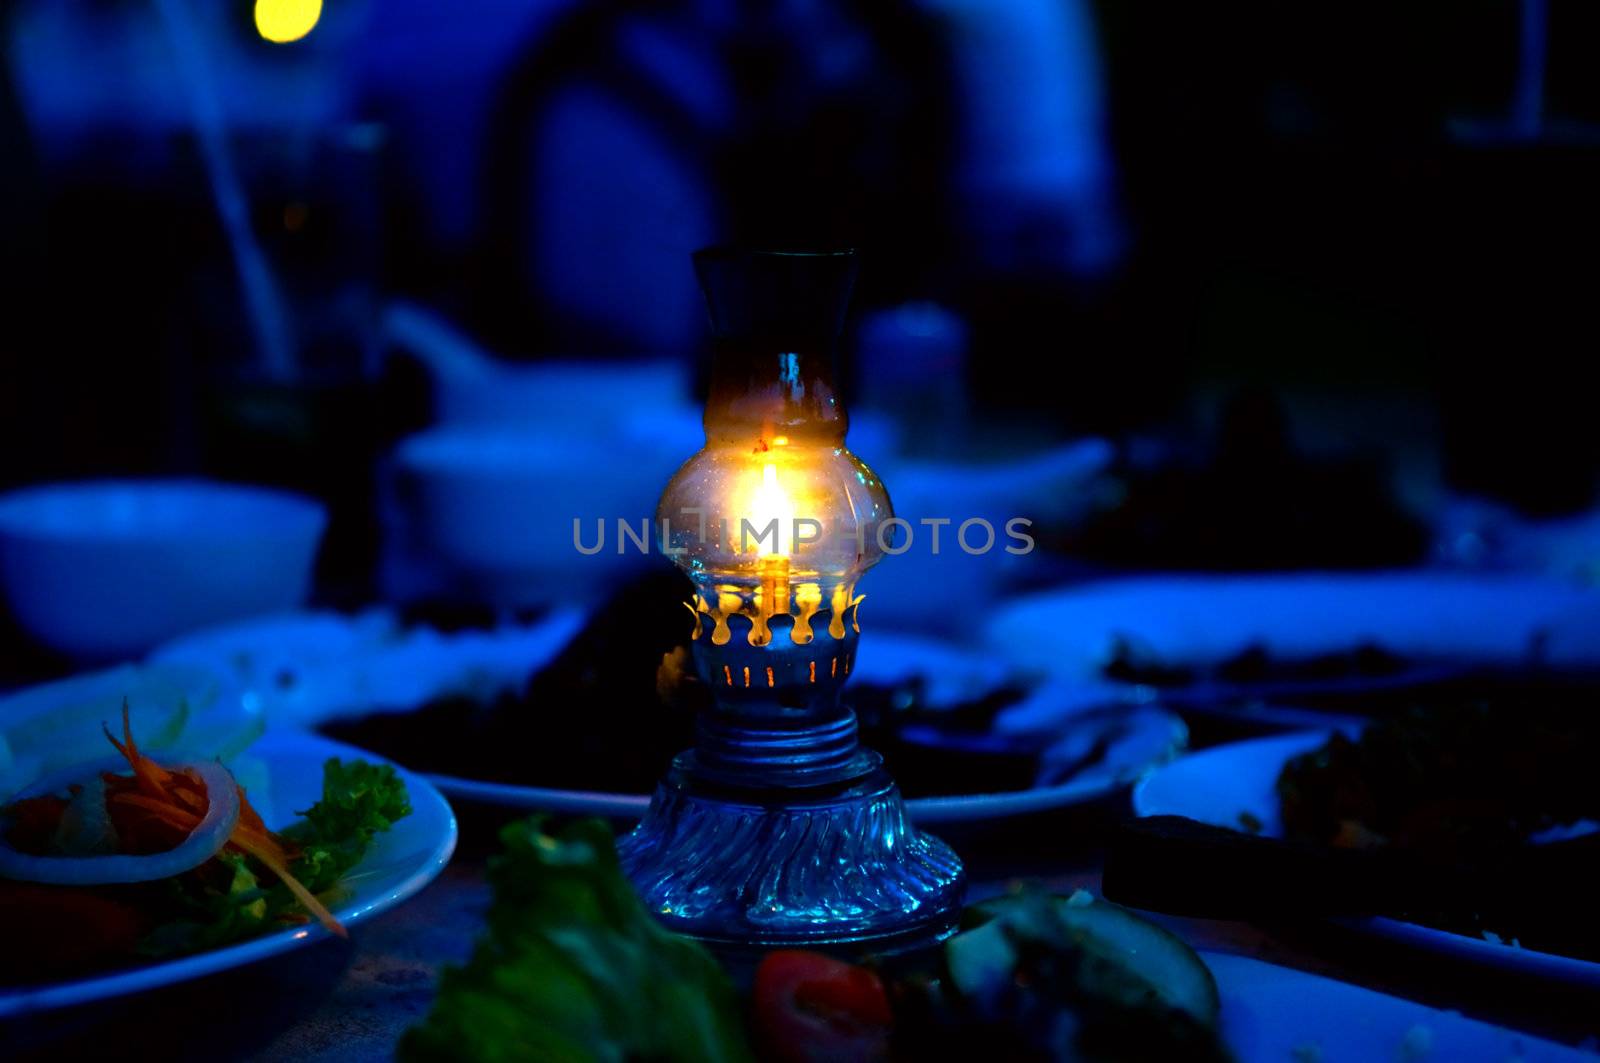 Dishes of food and evening lamp for illumination